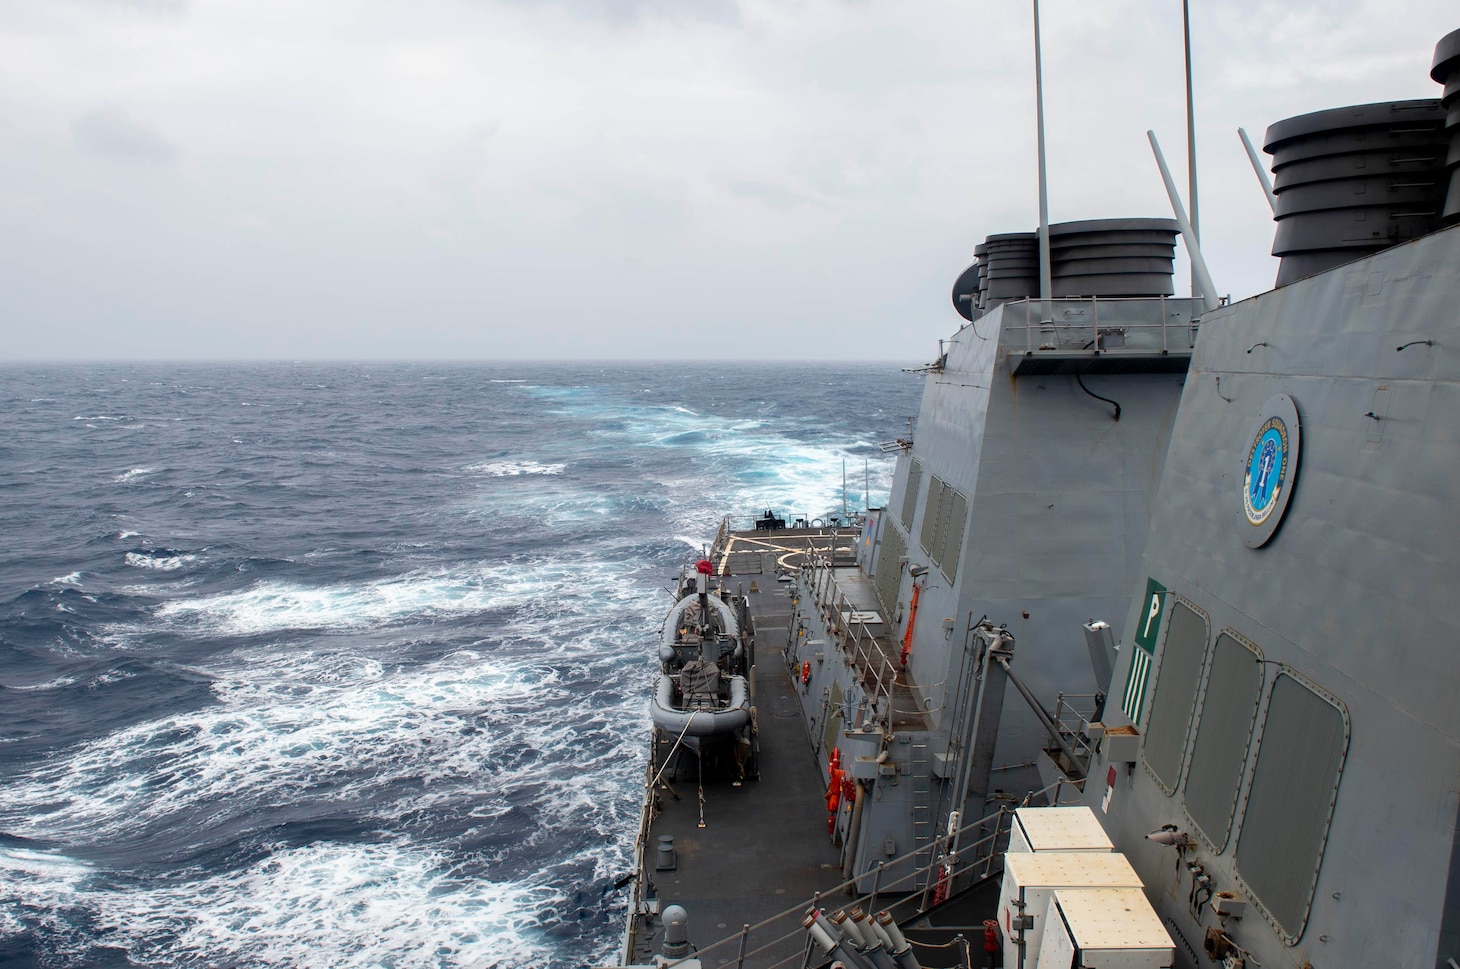 231125-N-EE352-1008 SOUTH CHINA SEA (Nov. 25, 2023) – The Arleigh Burke-class guided-missile destroyer USS Grace Hopper (DDG 70) conducts routine underway operations. Hopper is forward-deployed to the U.S. 7th Fleet area of operations in support of a free and open Indo-Pacific. (U.S. Navy photo by Mass Communication Specialist 2nd Class Leon Vonguyen)